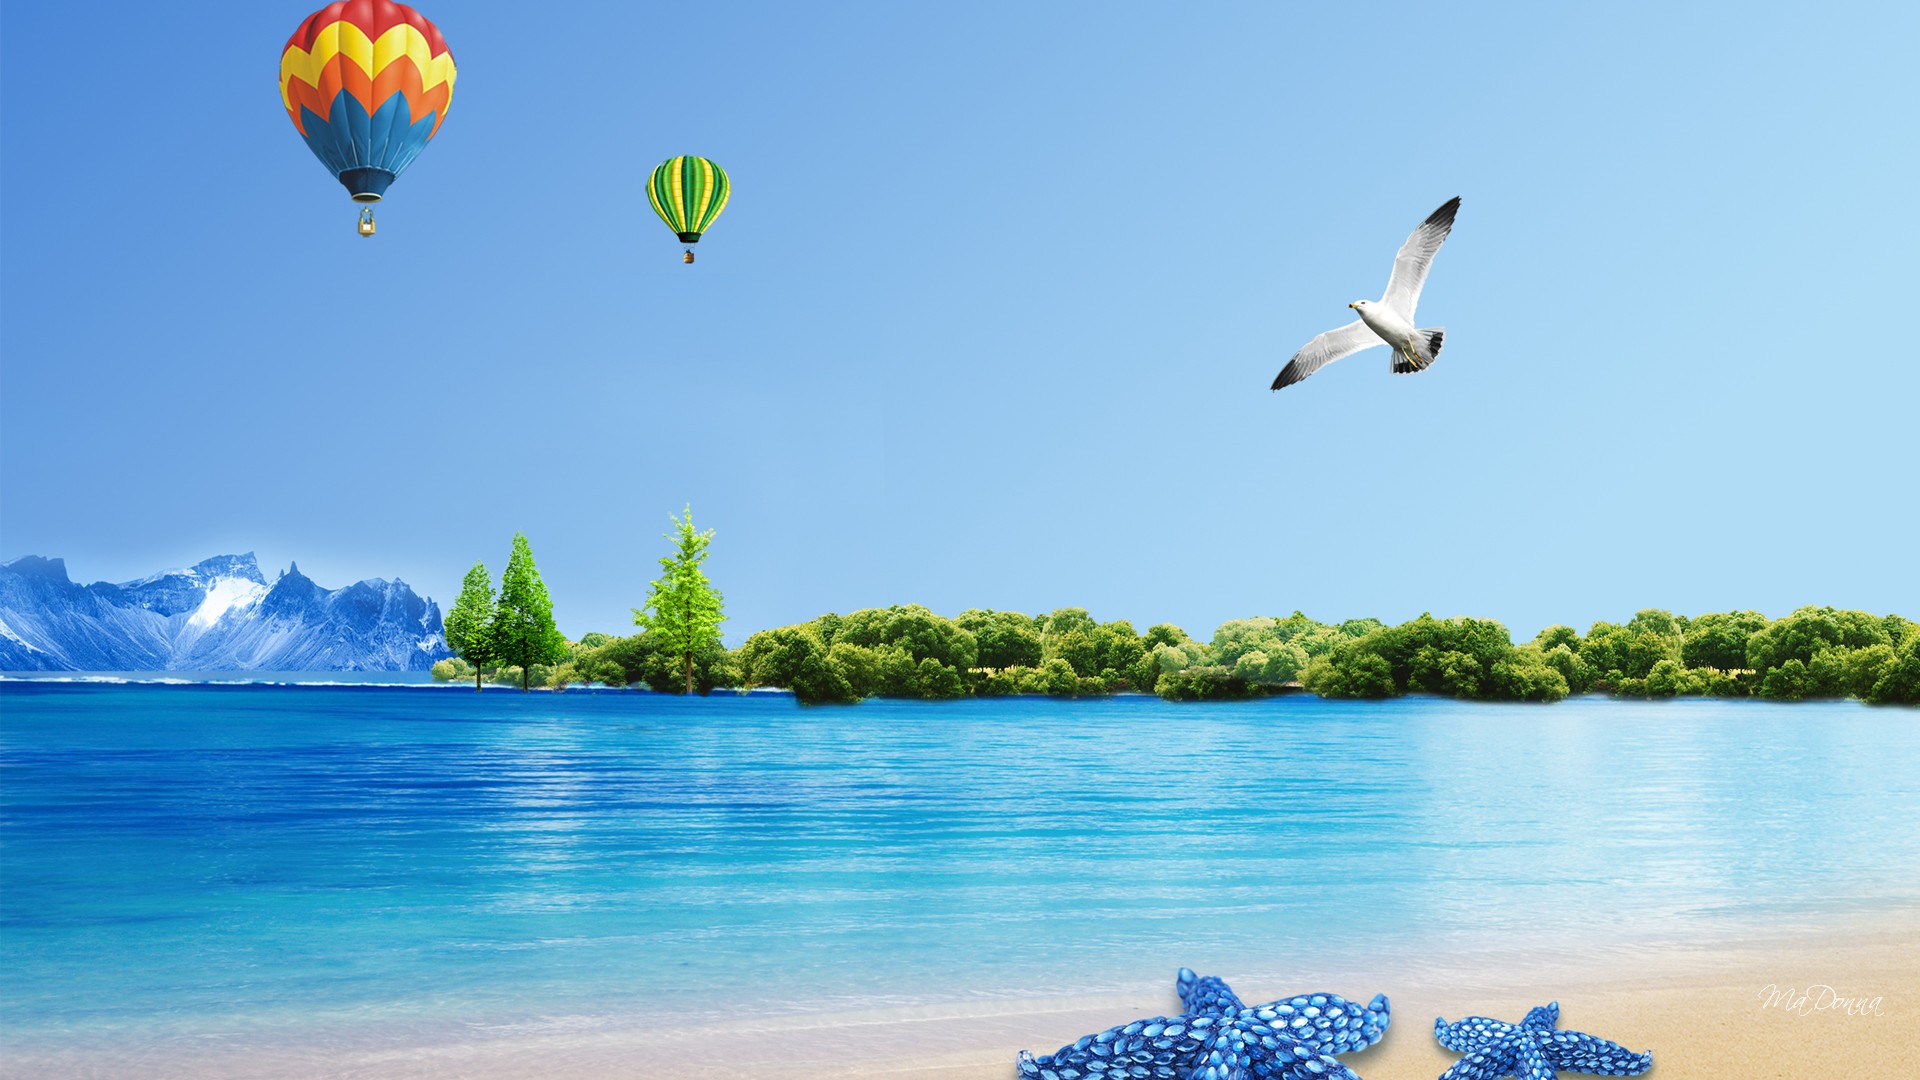 Summer Background Wallpaper Pictures In High Definition Or